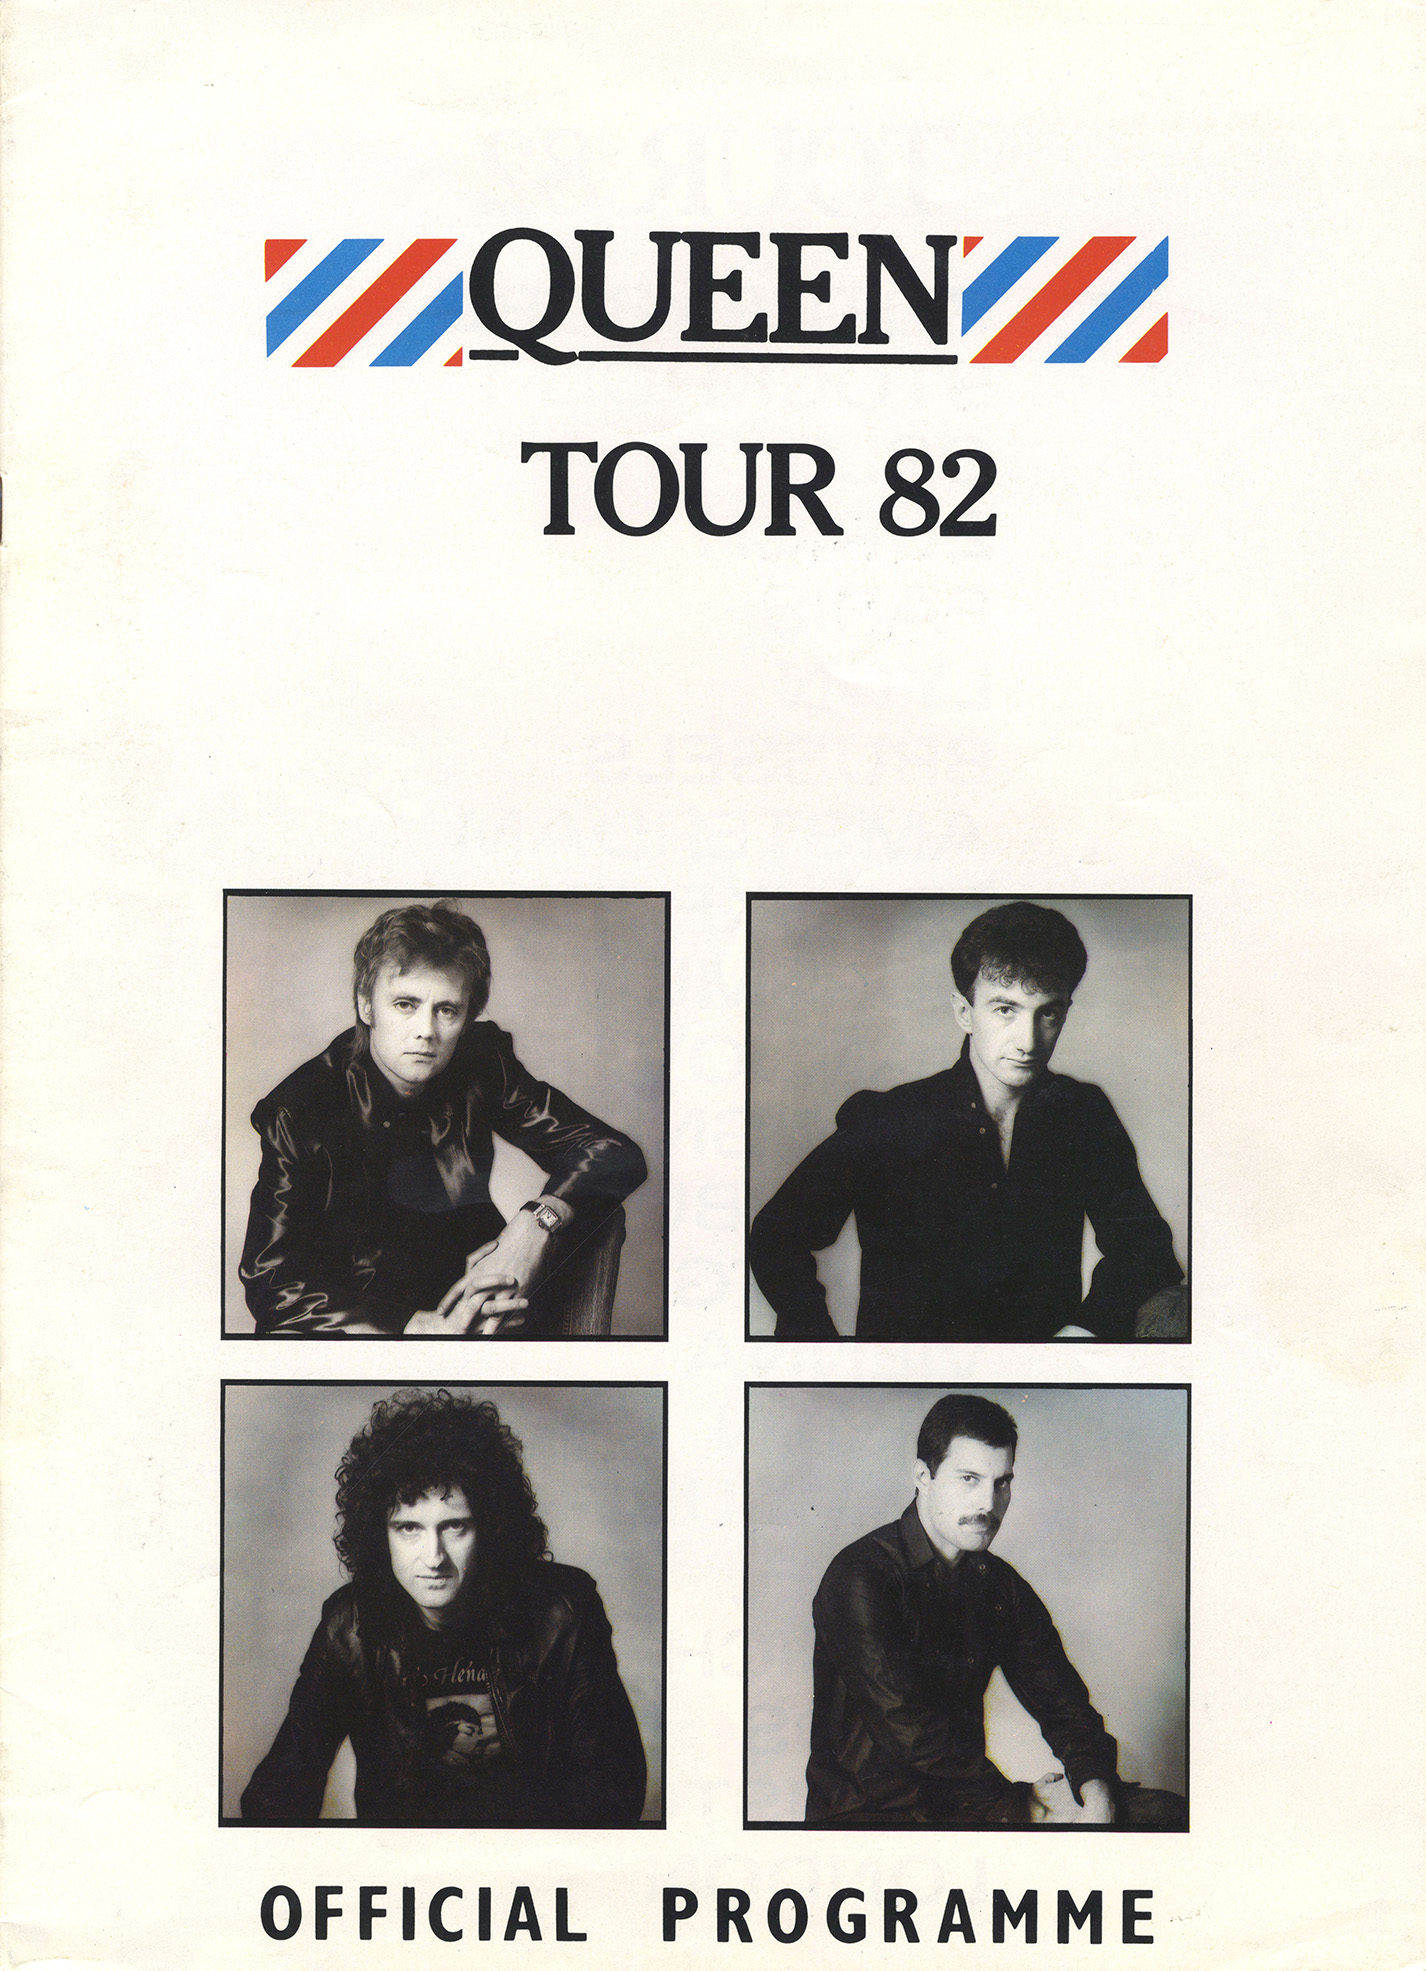 Hot Space tour program (Europe) - with cities listed on page 2 and Freddie photo on page 3